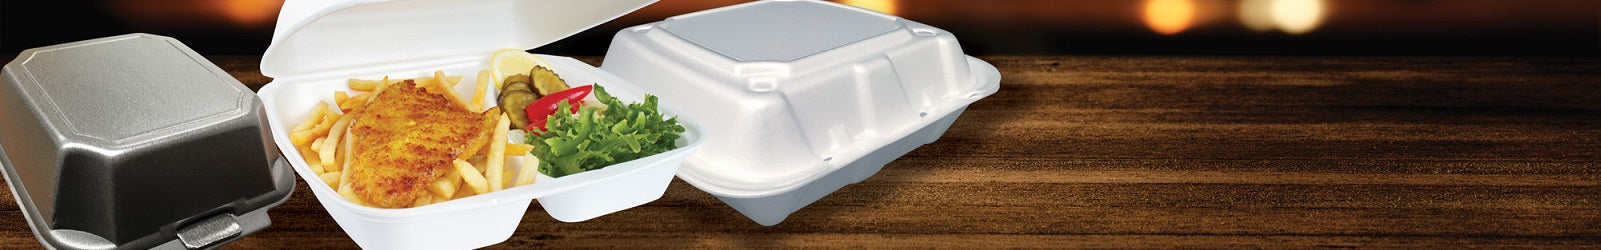 Take Out Food Containers Microwaveable Kraft Brown Take Out Boxes 45 oz (50  Pack) Leak and Grease Resistant Food Containers - Recyclable Lunch Box - To Go  Containers for Restaurant, Catering and Party